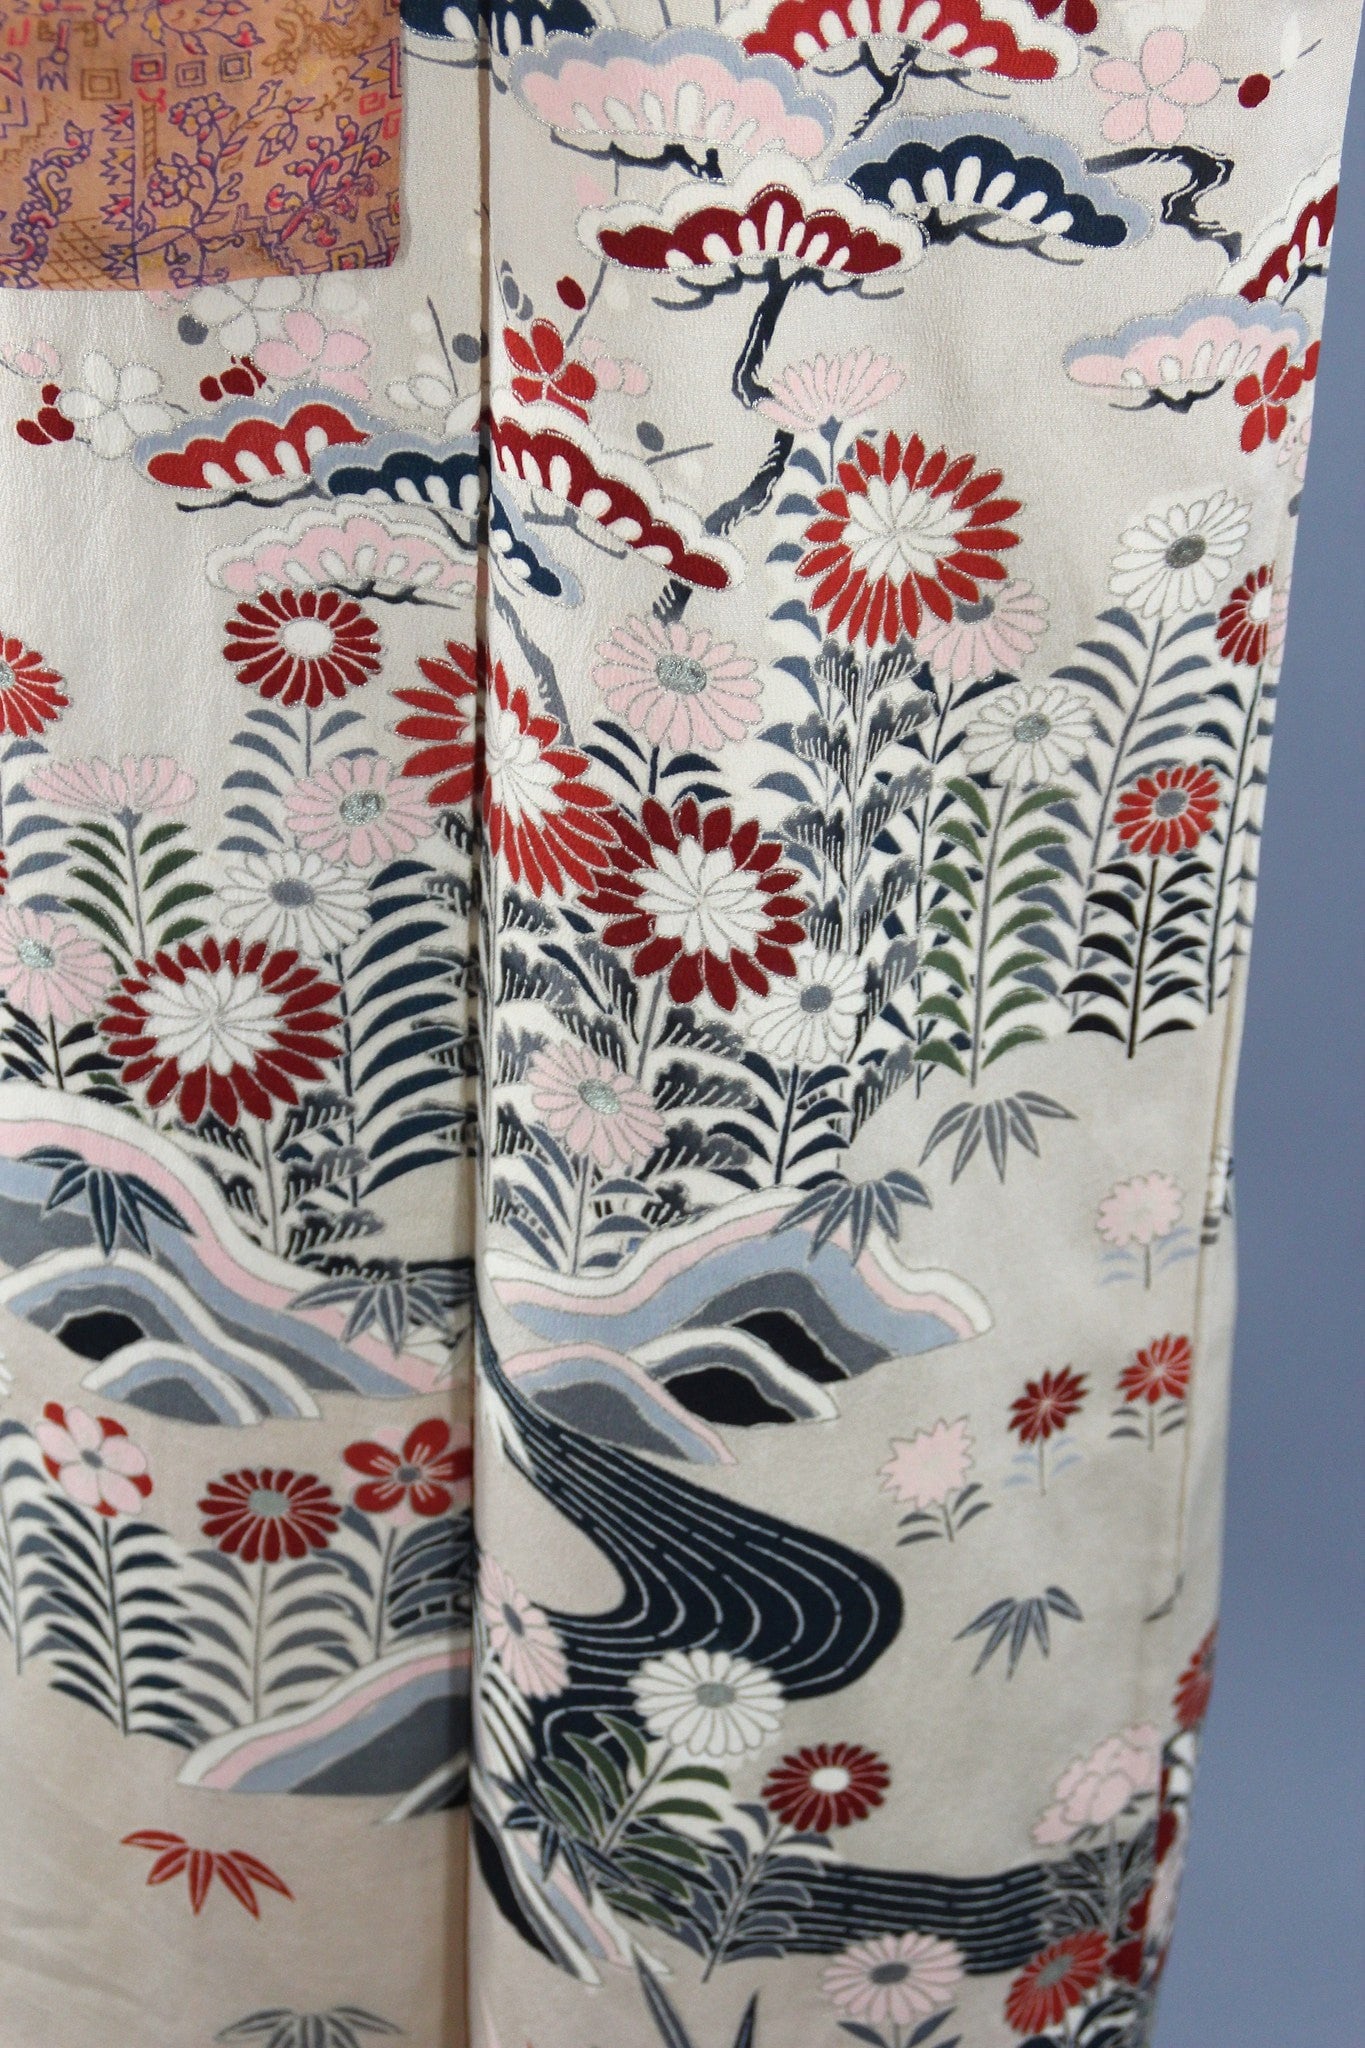 1940s Vintage Silk Kimono Robe in Ivory with an Art Deco Floral Print - ThisBlueBird